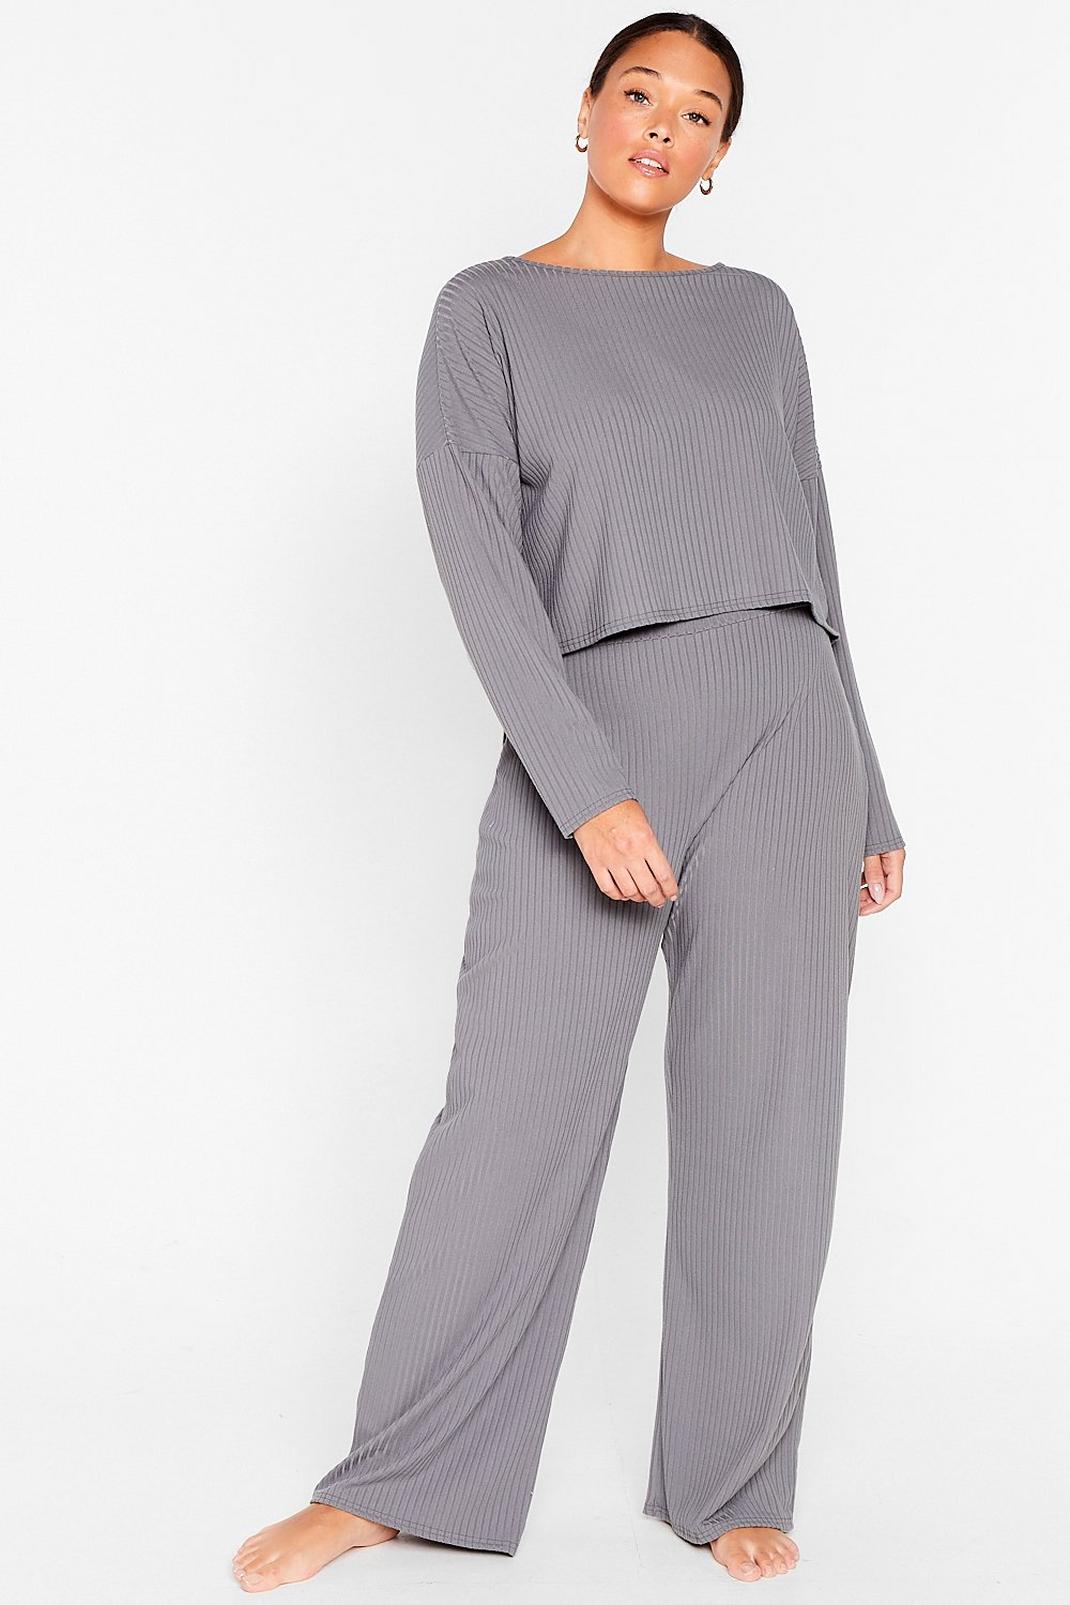 Grey Plus Size Top and Pants Loungewear Set image number 1